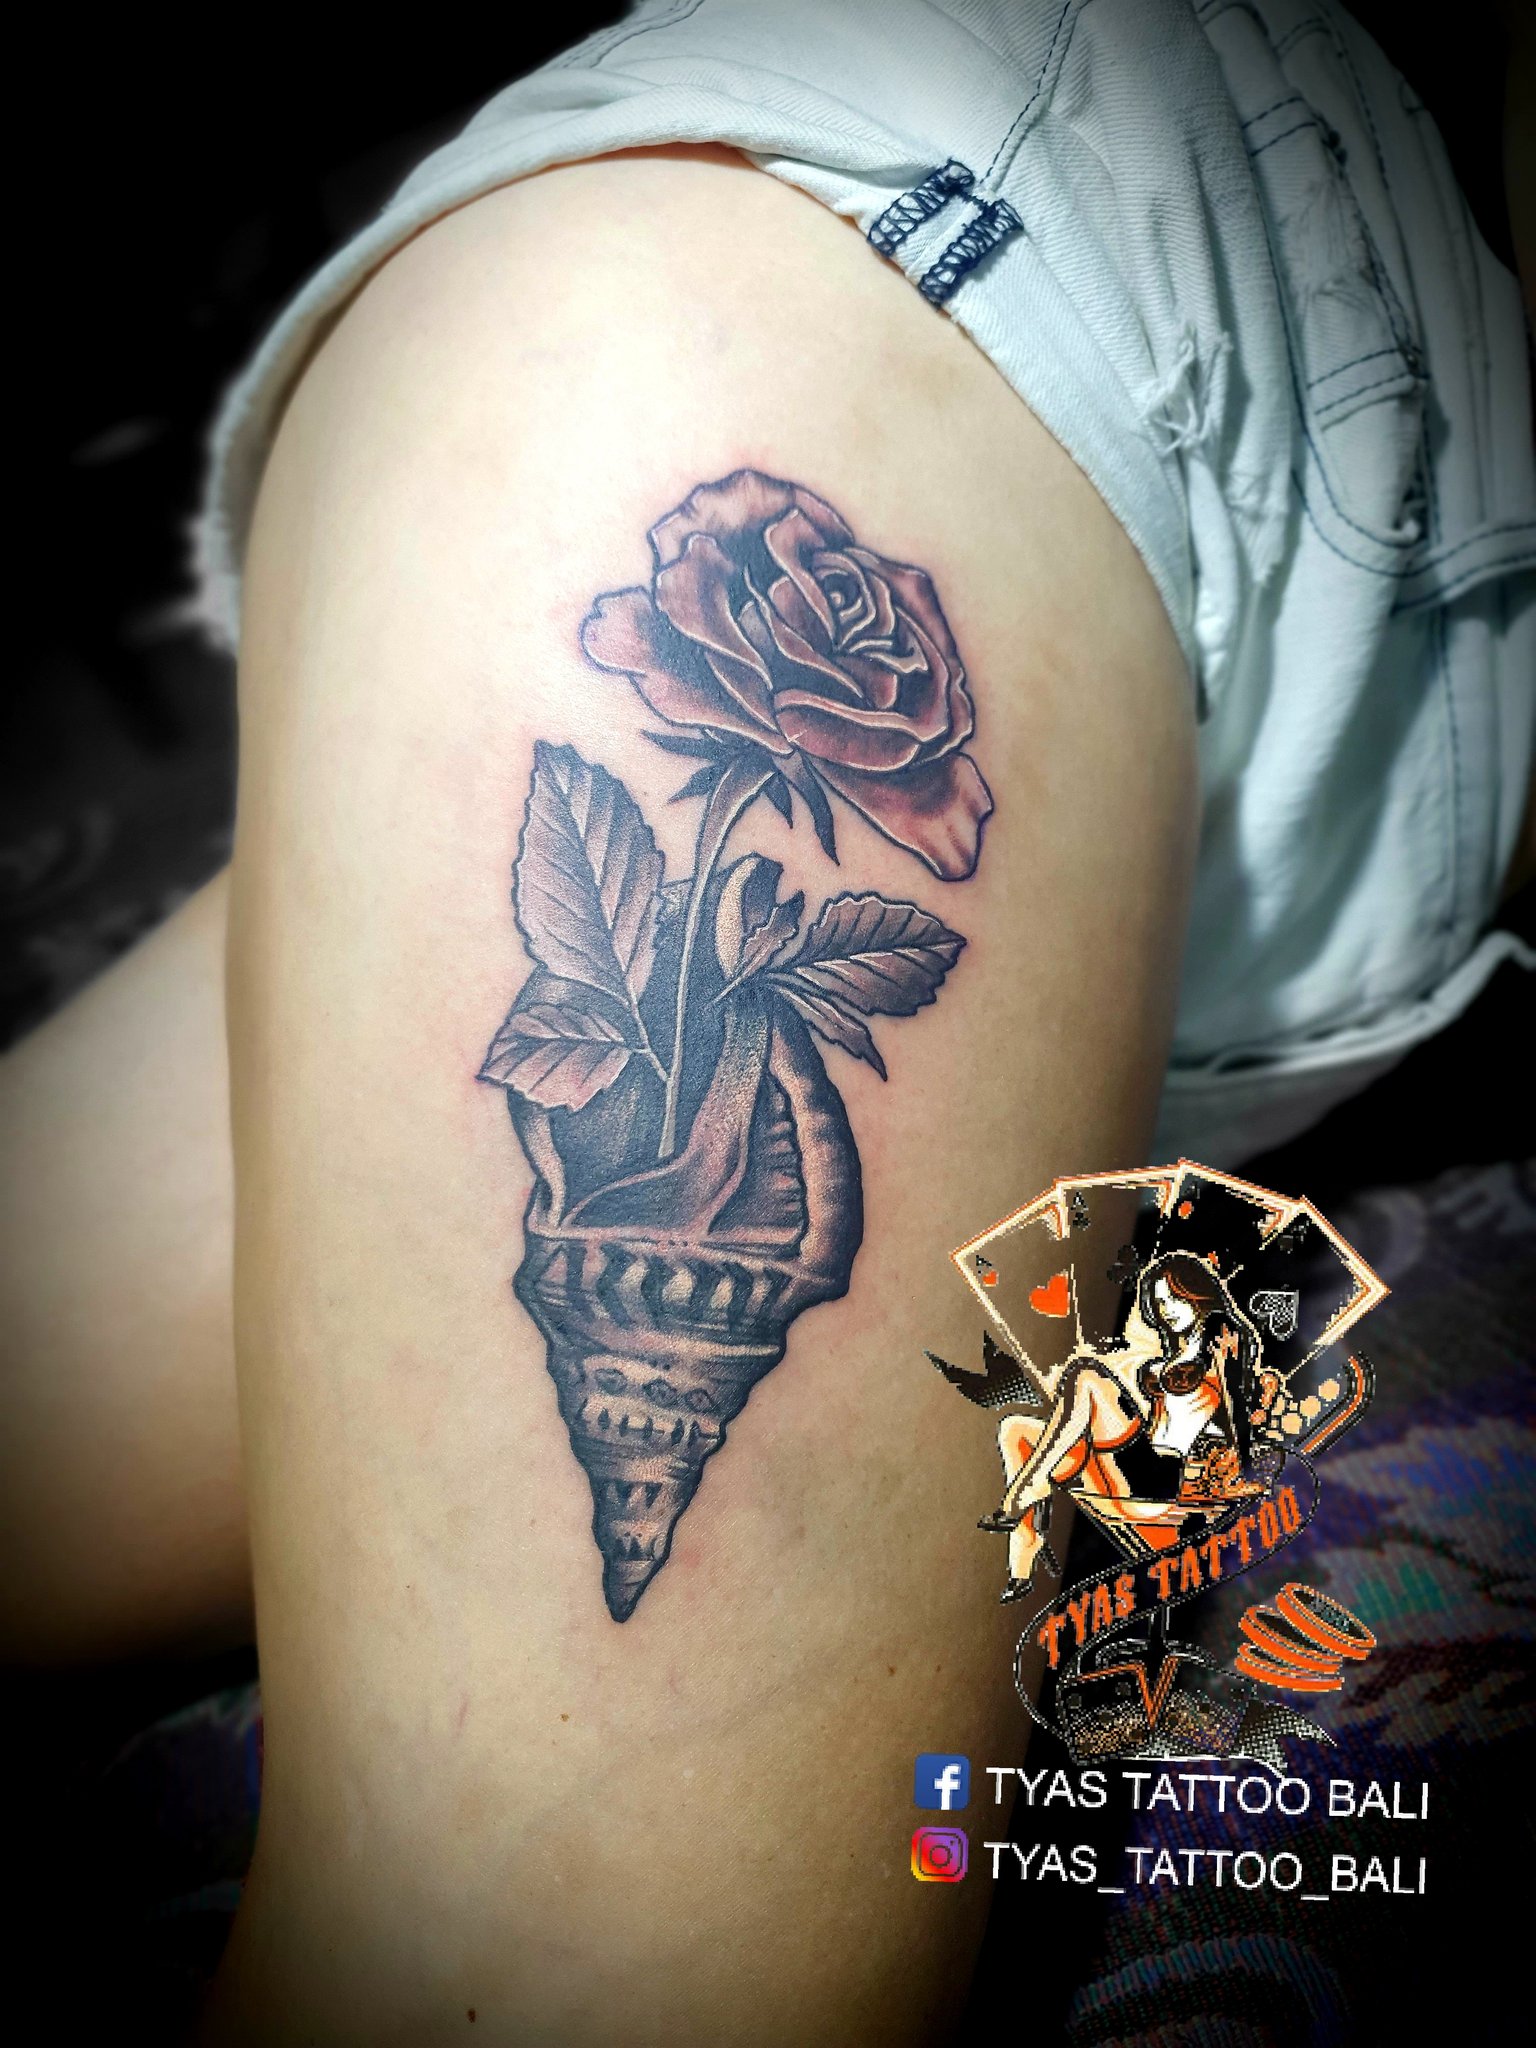 Who doesnt love ice cream Traditional rose heart and banner tattoo  Made by Kati Vaughn in Brooklyn NY  Tattoos Body tattoos Skull tattoo